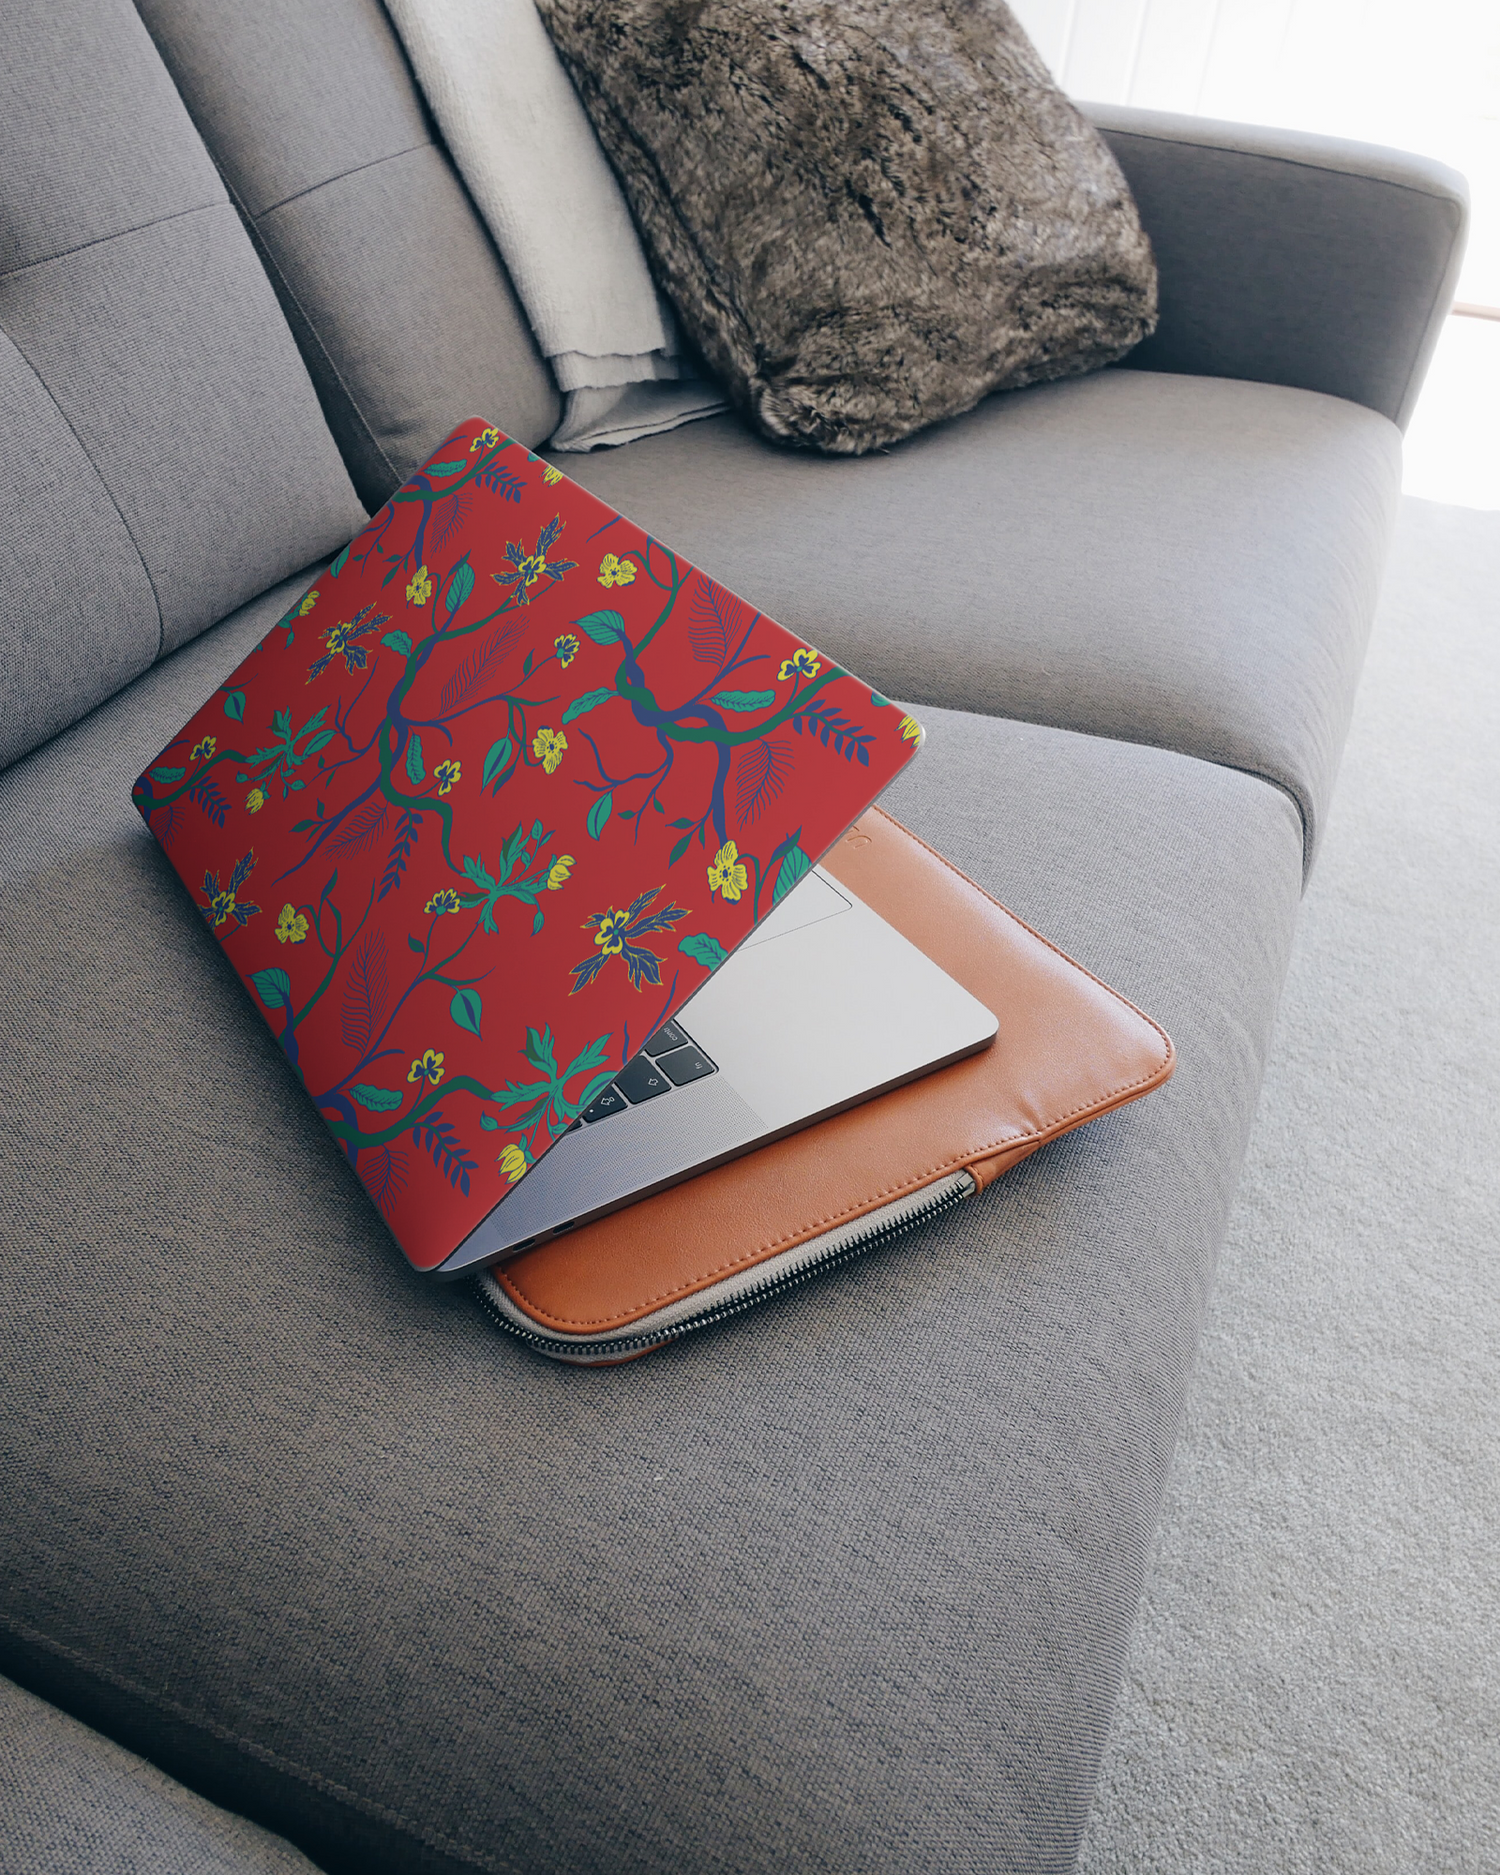 Ultra Red Floral Laptop Skin for 15 inch Apple MacBooks on a couch